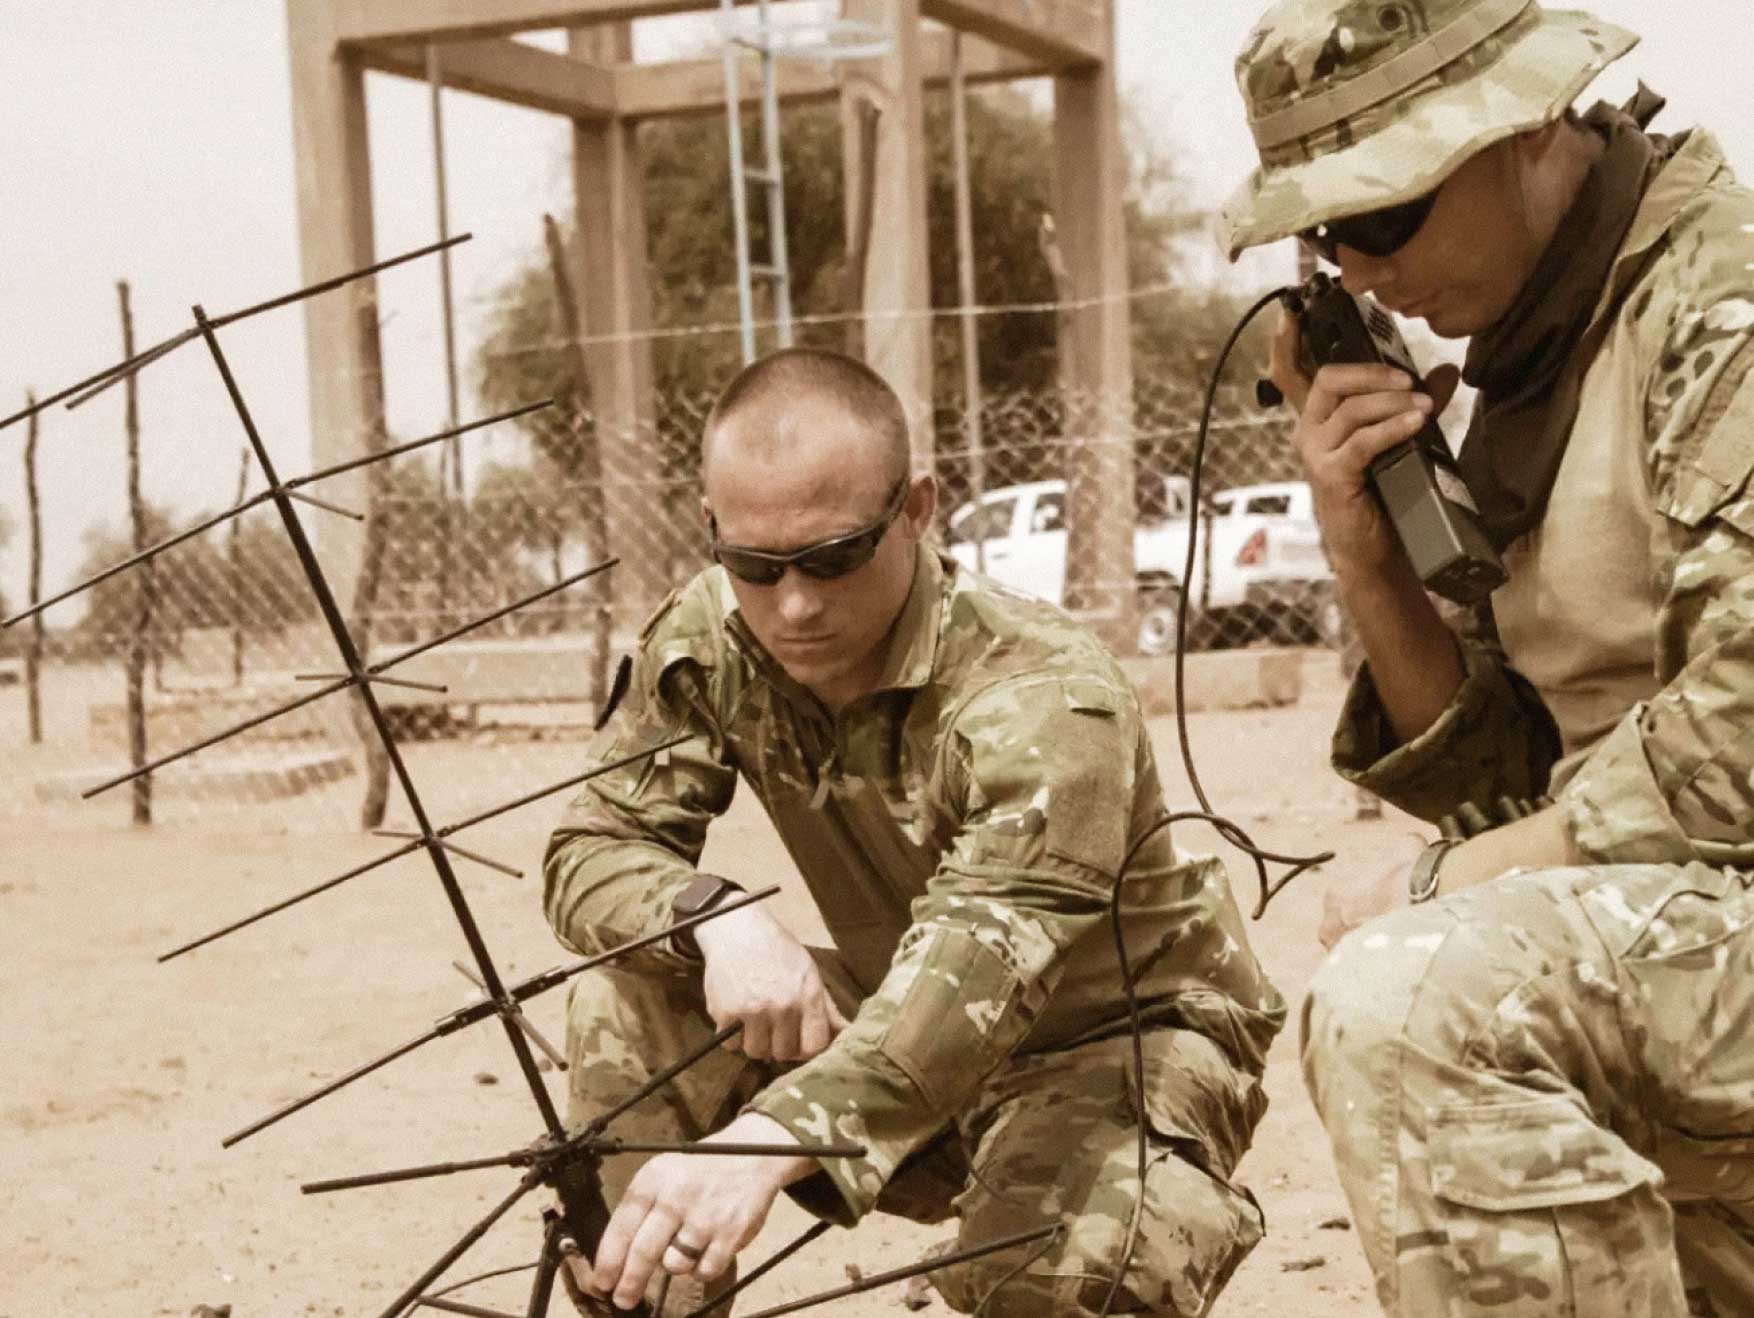 Two Psychological Operations Soldiers kneeling in sand setting up communications technology